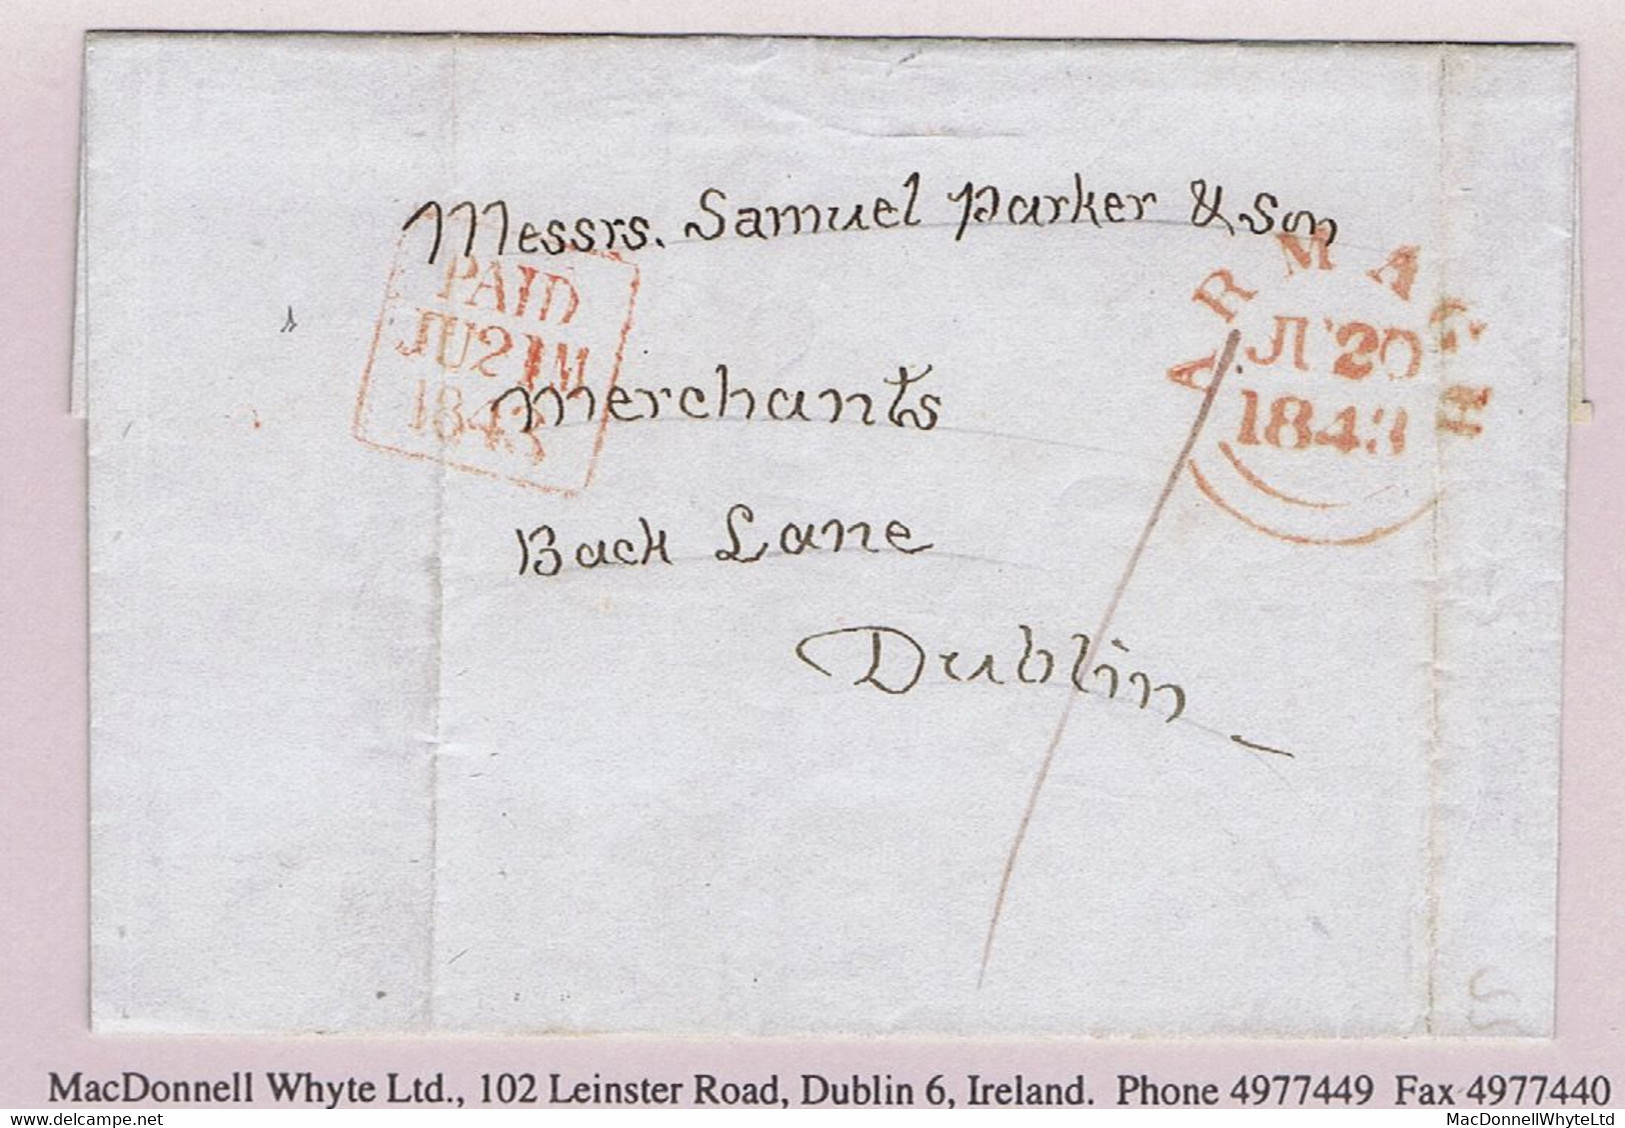 Ireland Armagh Uniform Penny Post 1844 Cover Maguiresbridge To Dublin Prepaid "1" With ARMAGH JU 20 1843 Cds In Red - Prefilatelia